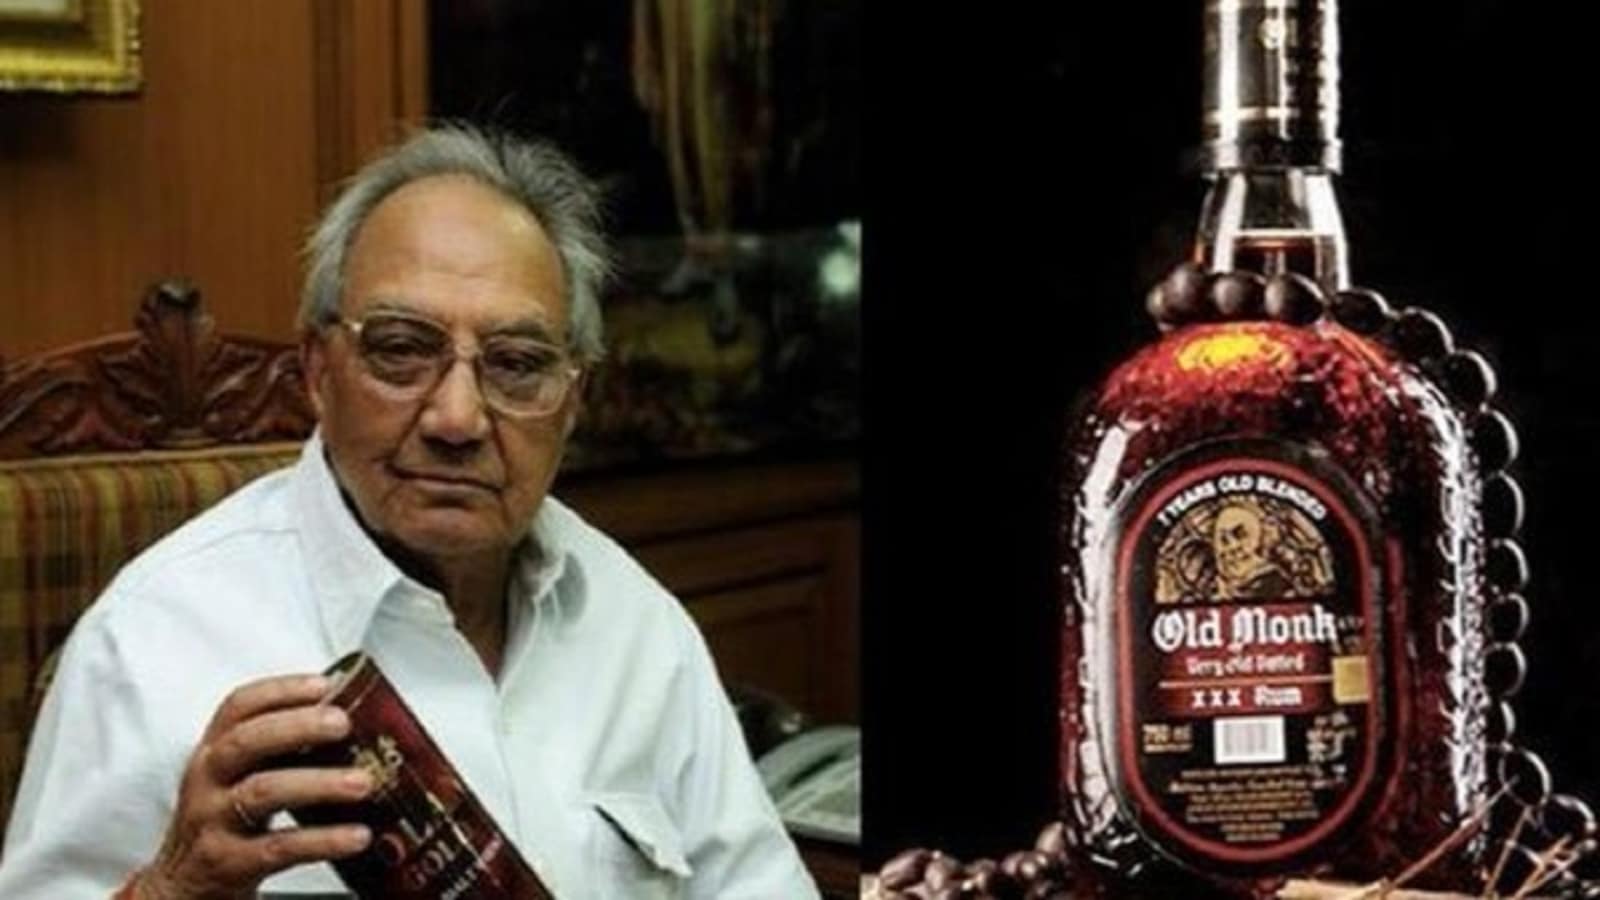 How the next generation of Mohan brothers are planning to lift Old Monk's  spirits